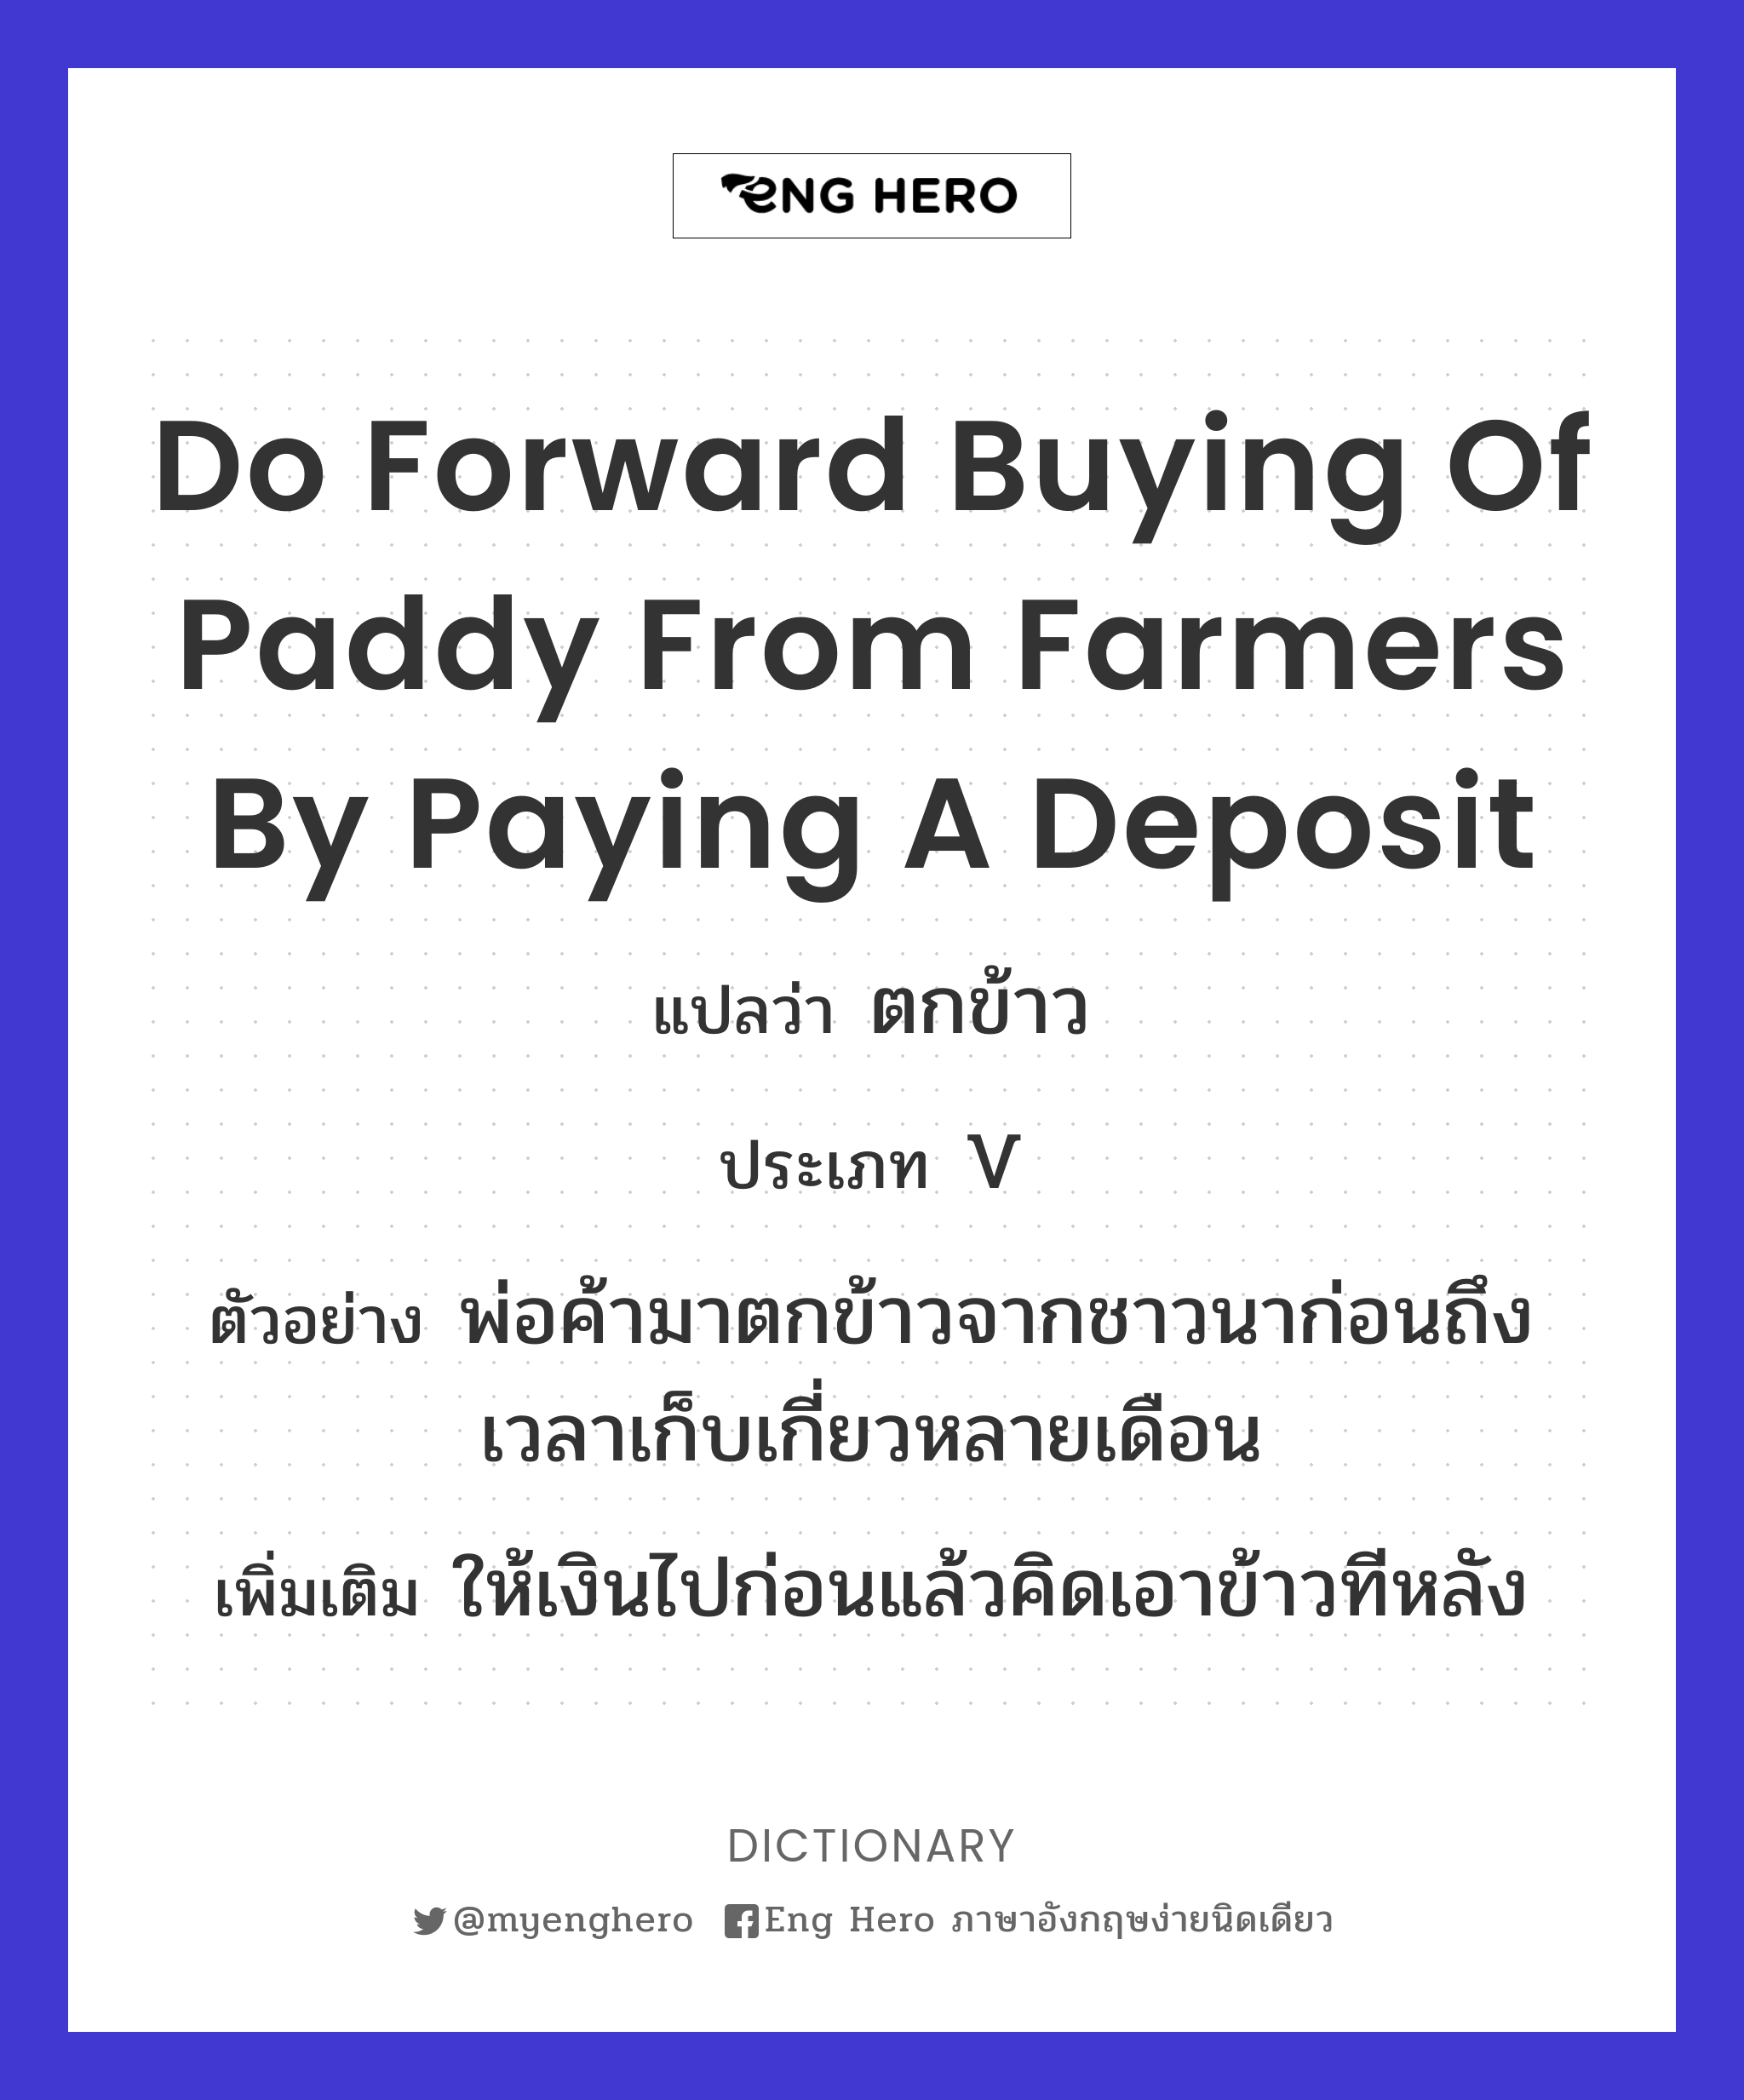 do forward buying of paddy from farmers by paying a deposit